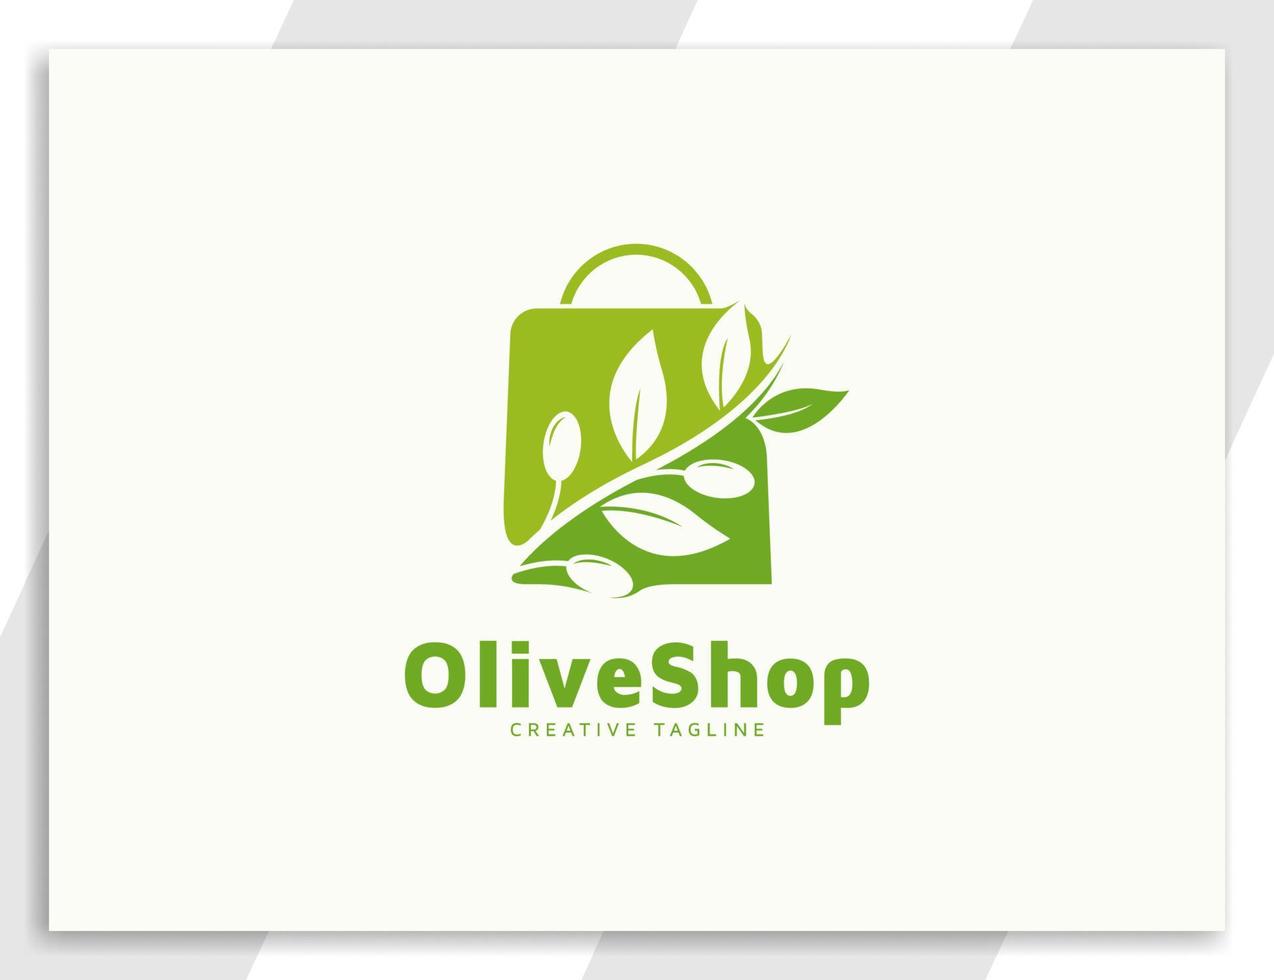 Green olive oil shop logo with leaves and shopping bag illustration vector